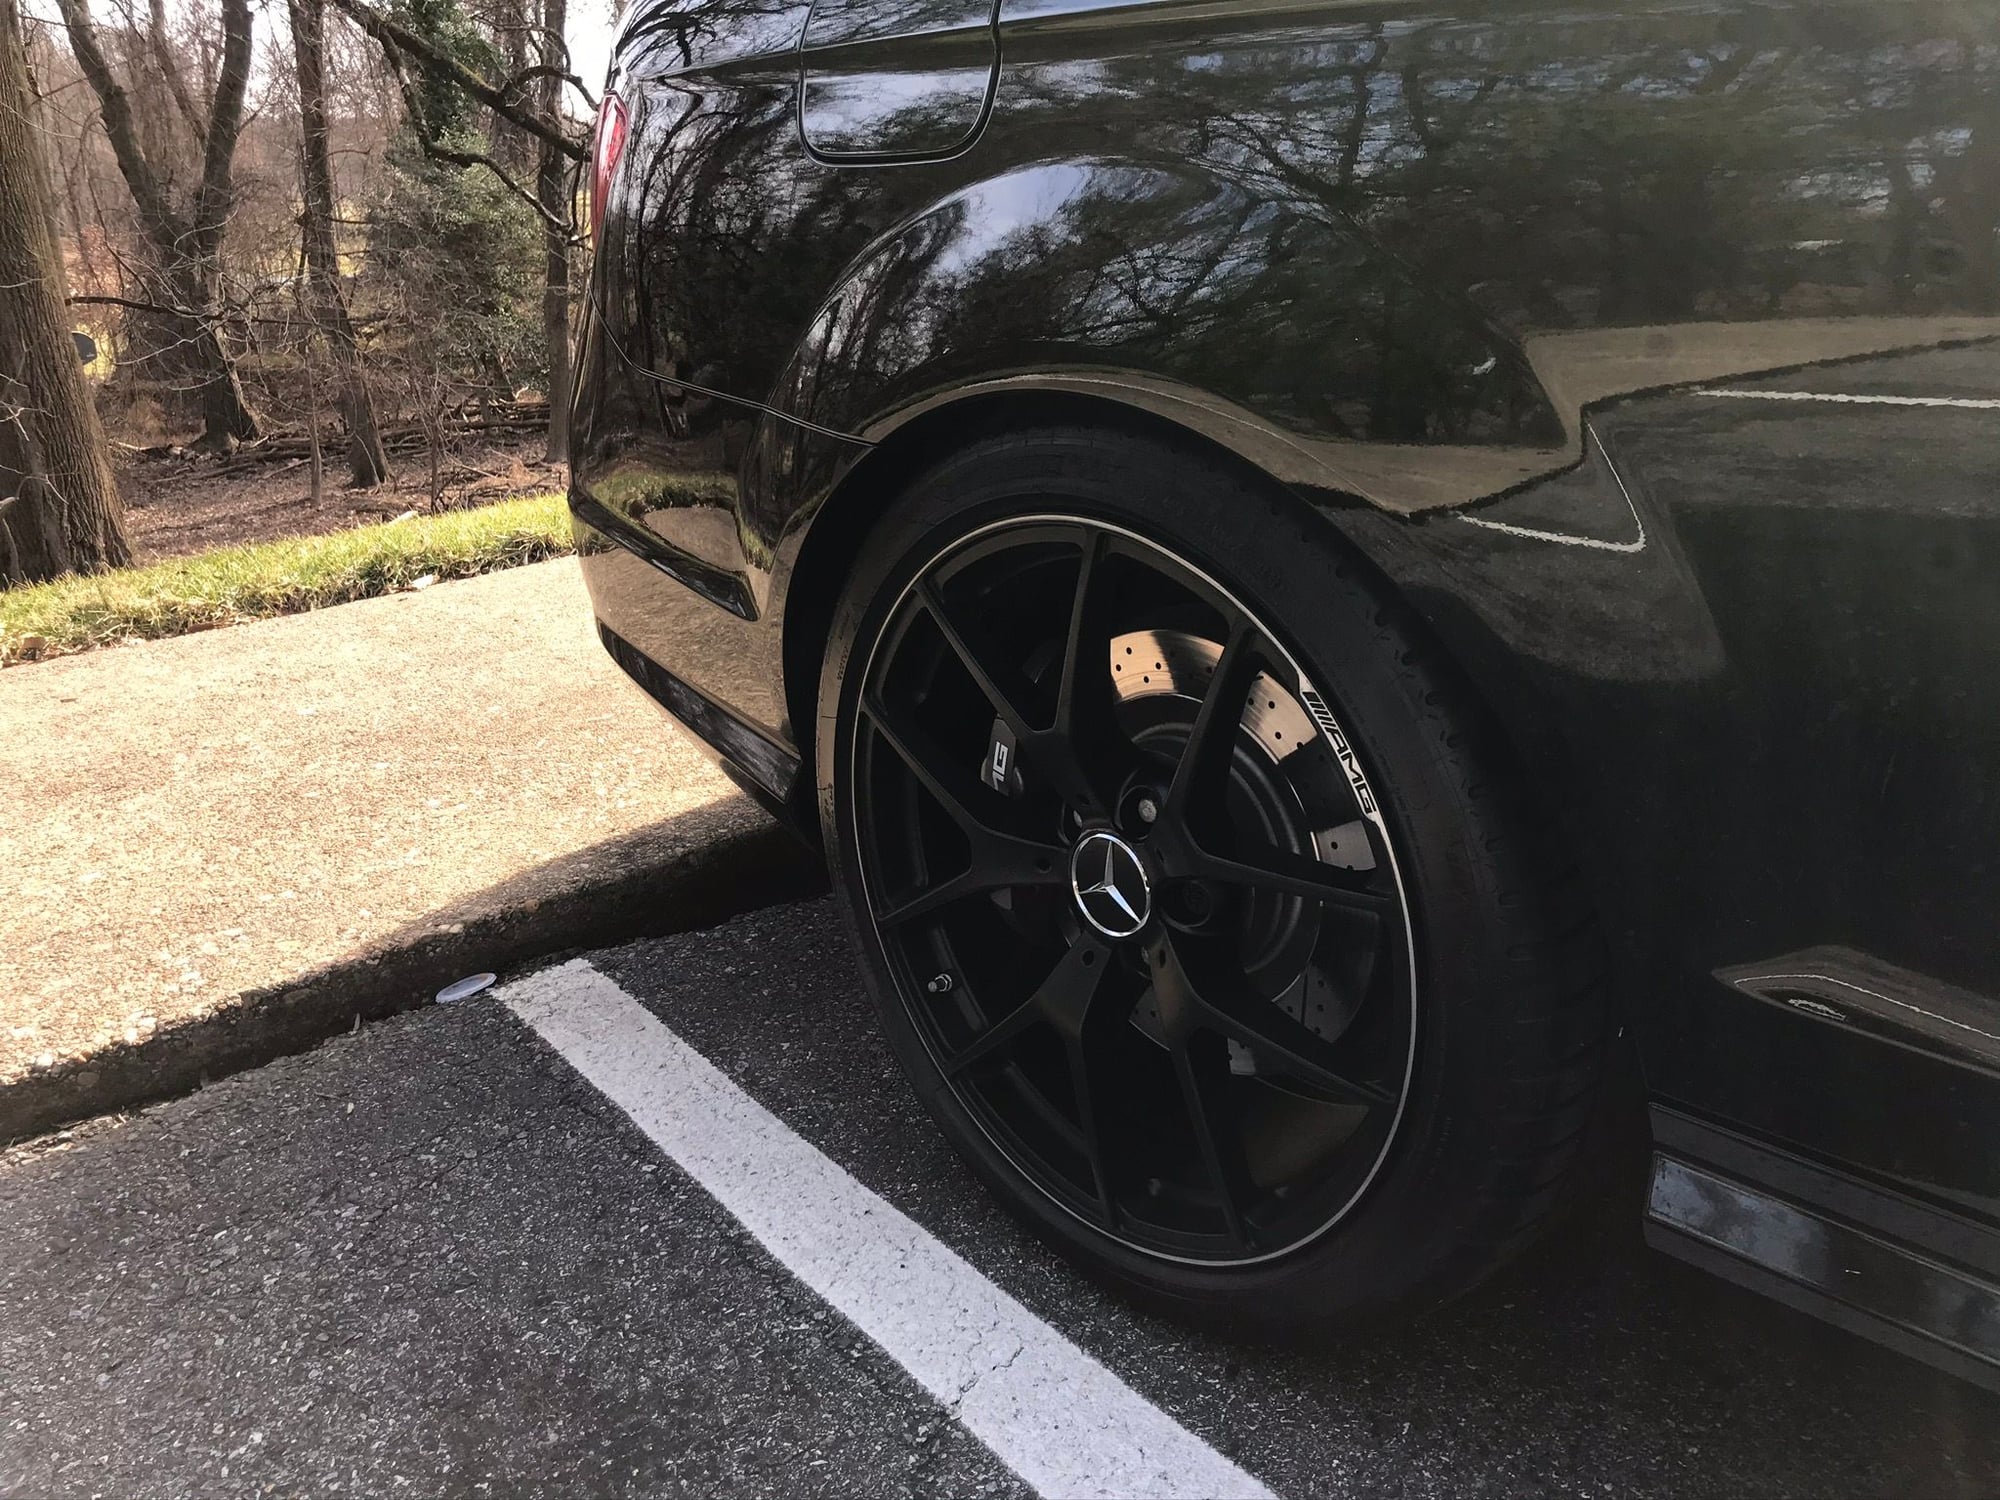 Wheels and Tires/Axles - Mercedes Benz C63 507 Edition Wheels For Sale - Used - 2011 to 2015 Mercedes-Benz C63 AMG - Rockville, MD 20852, United States